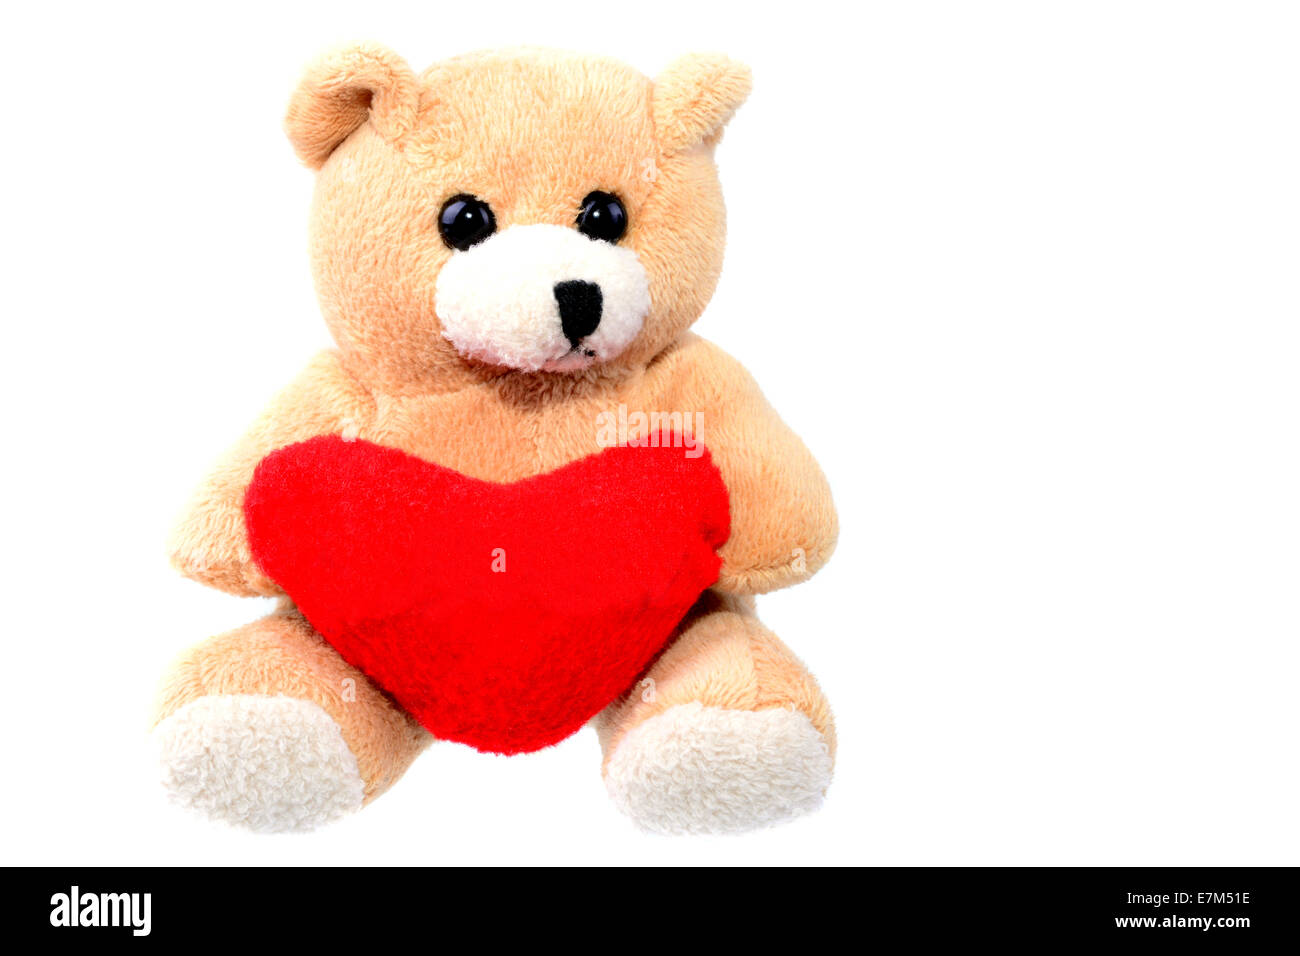 Small teddy bear holding a red heart isolated on white with copy space Stock Photo